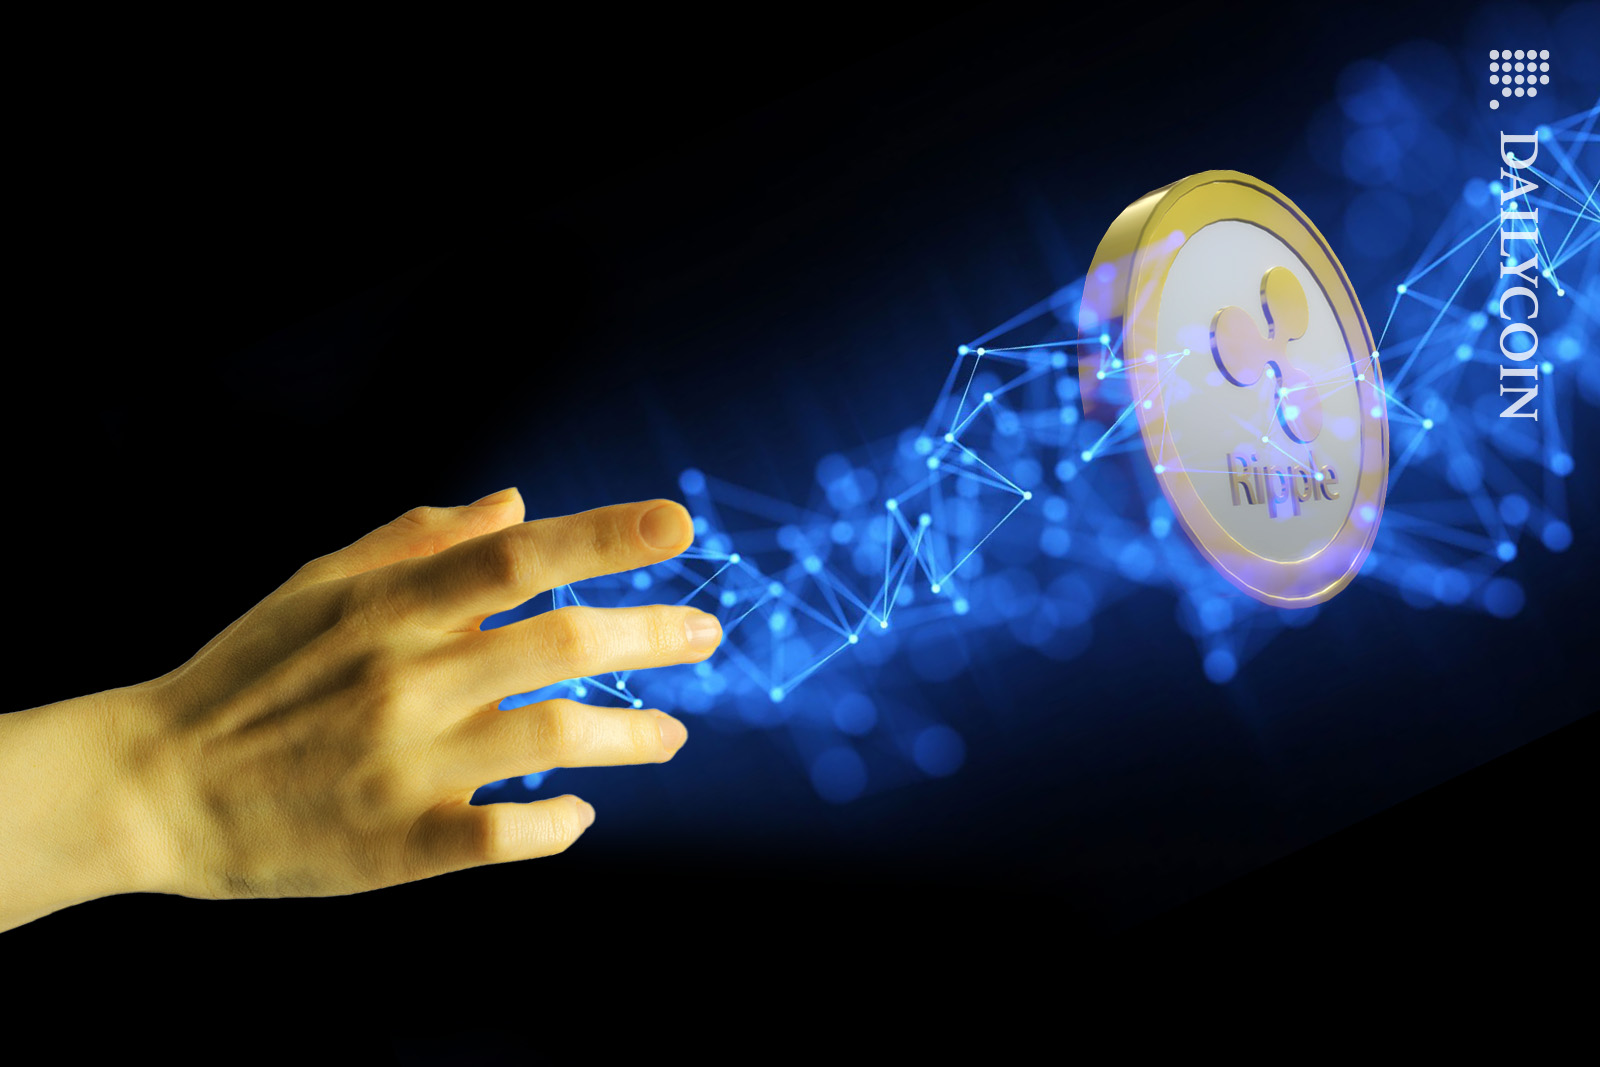 A human hand touching Ripple XRP coin with magical blockchain powers.